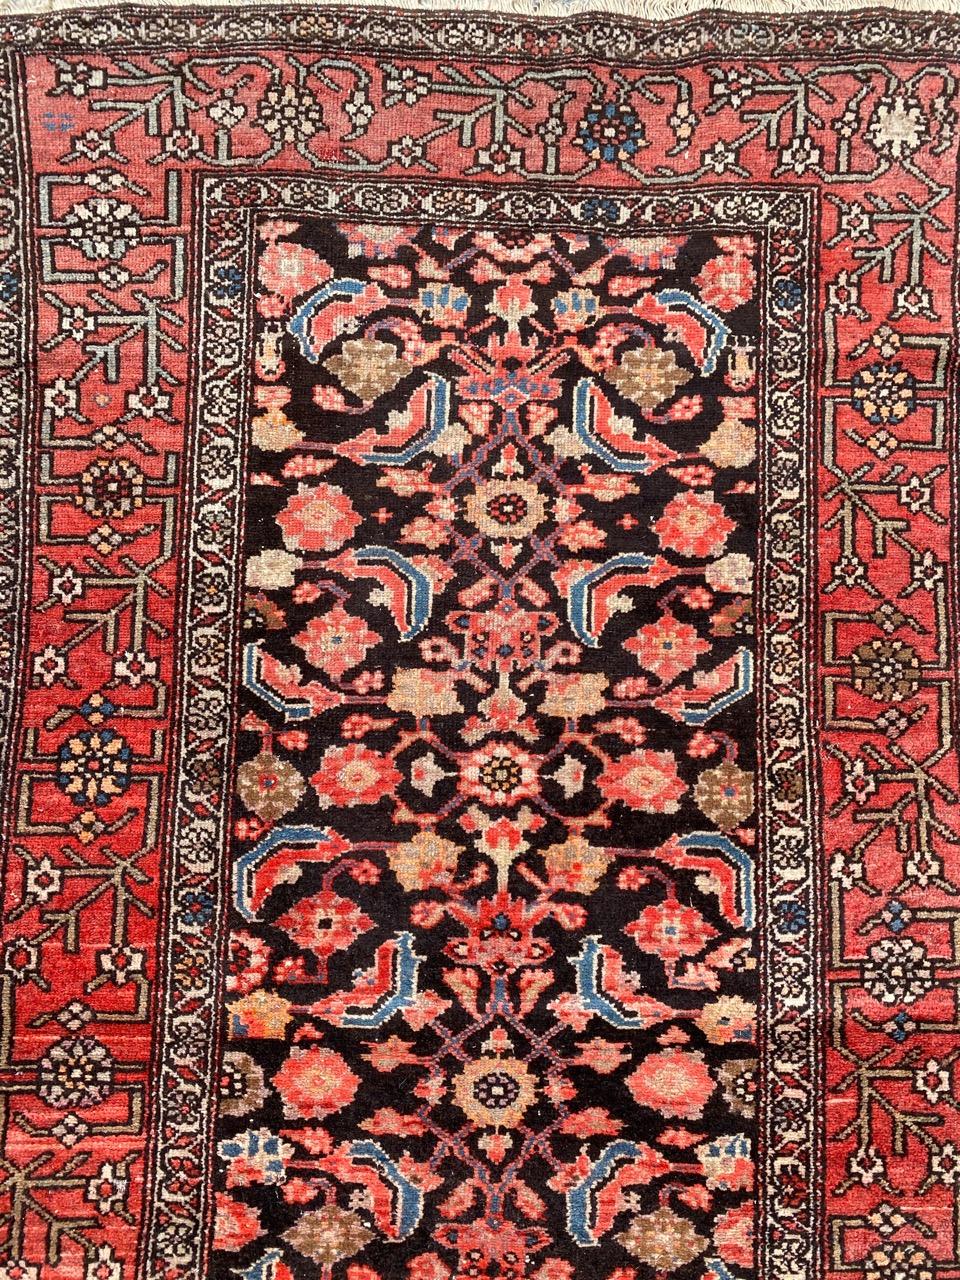 Very beautiful early 20th century Malayer runner with beautiful Herati design and beautiful natural colors, entirely hand knotted with wool velvet on cotton foundation.